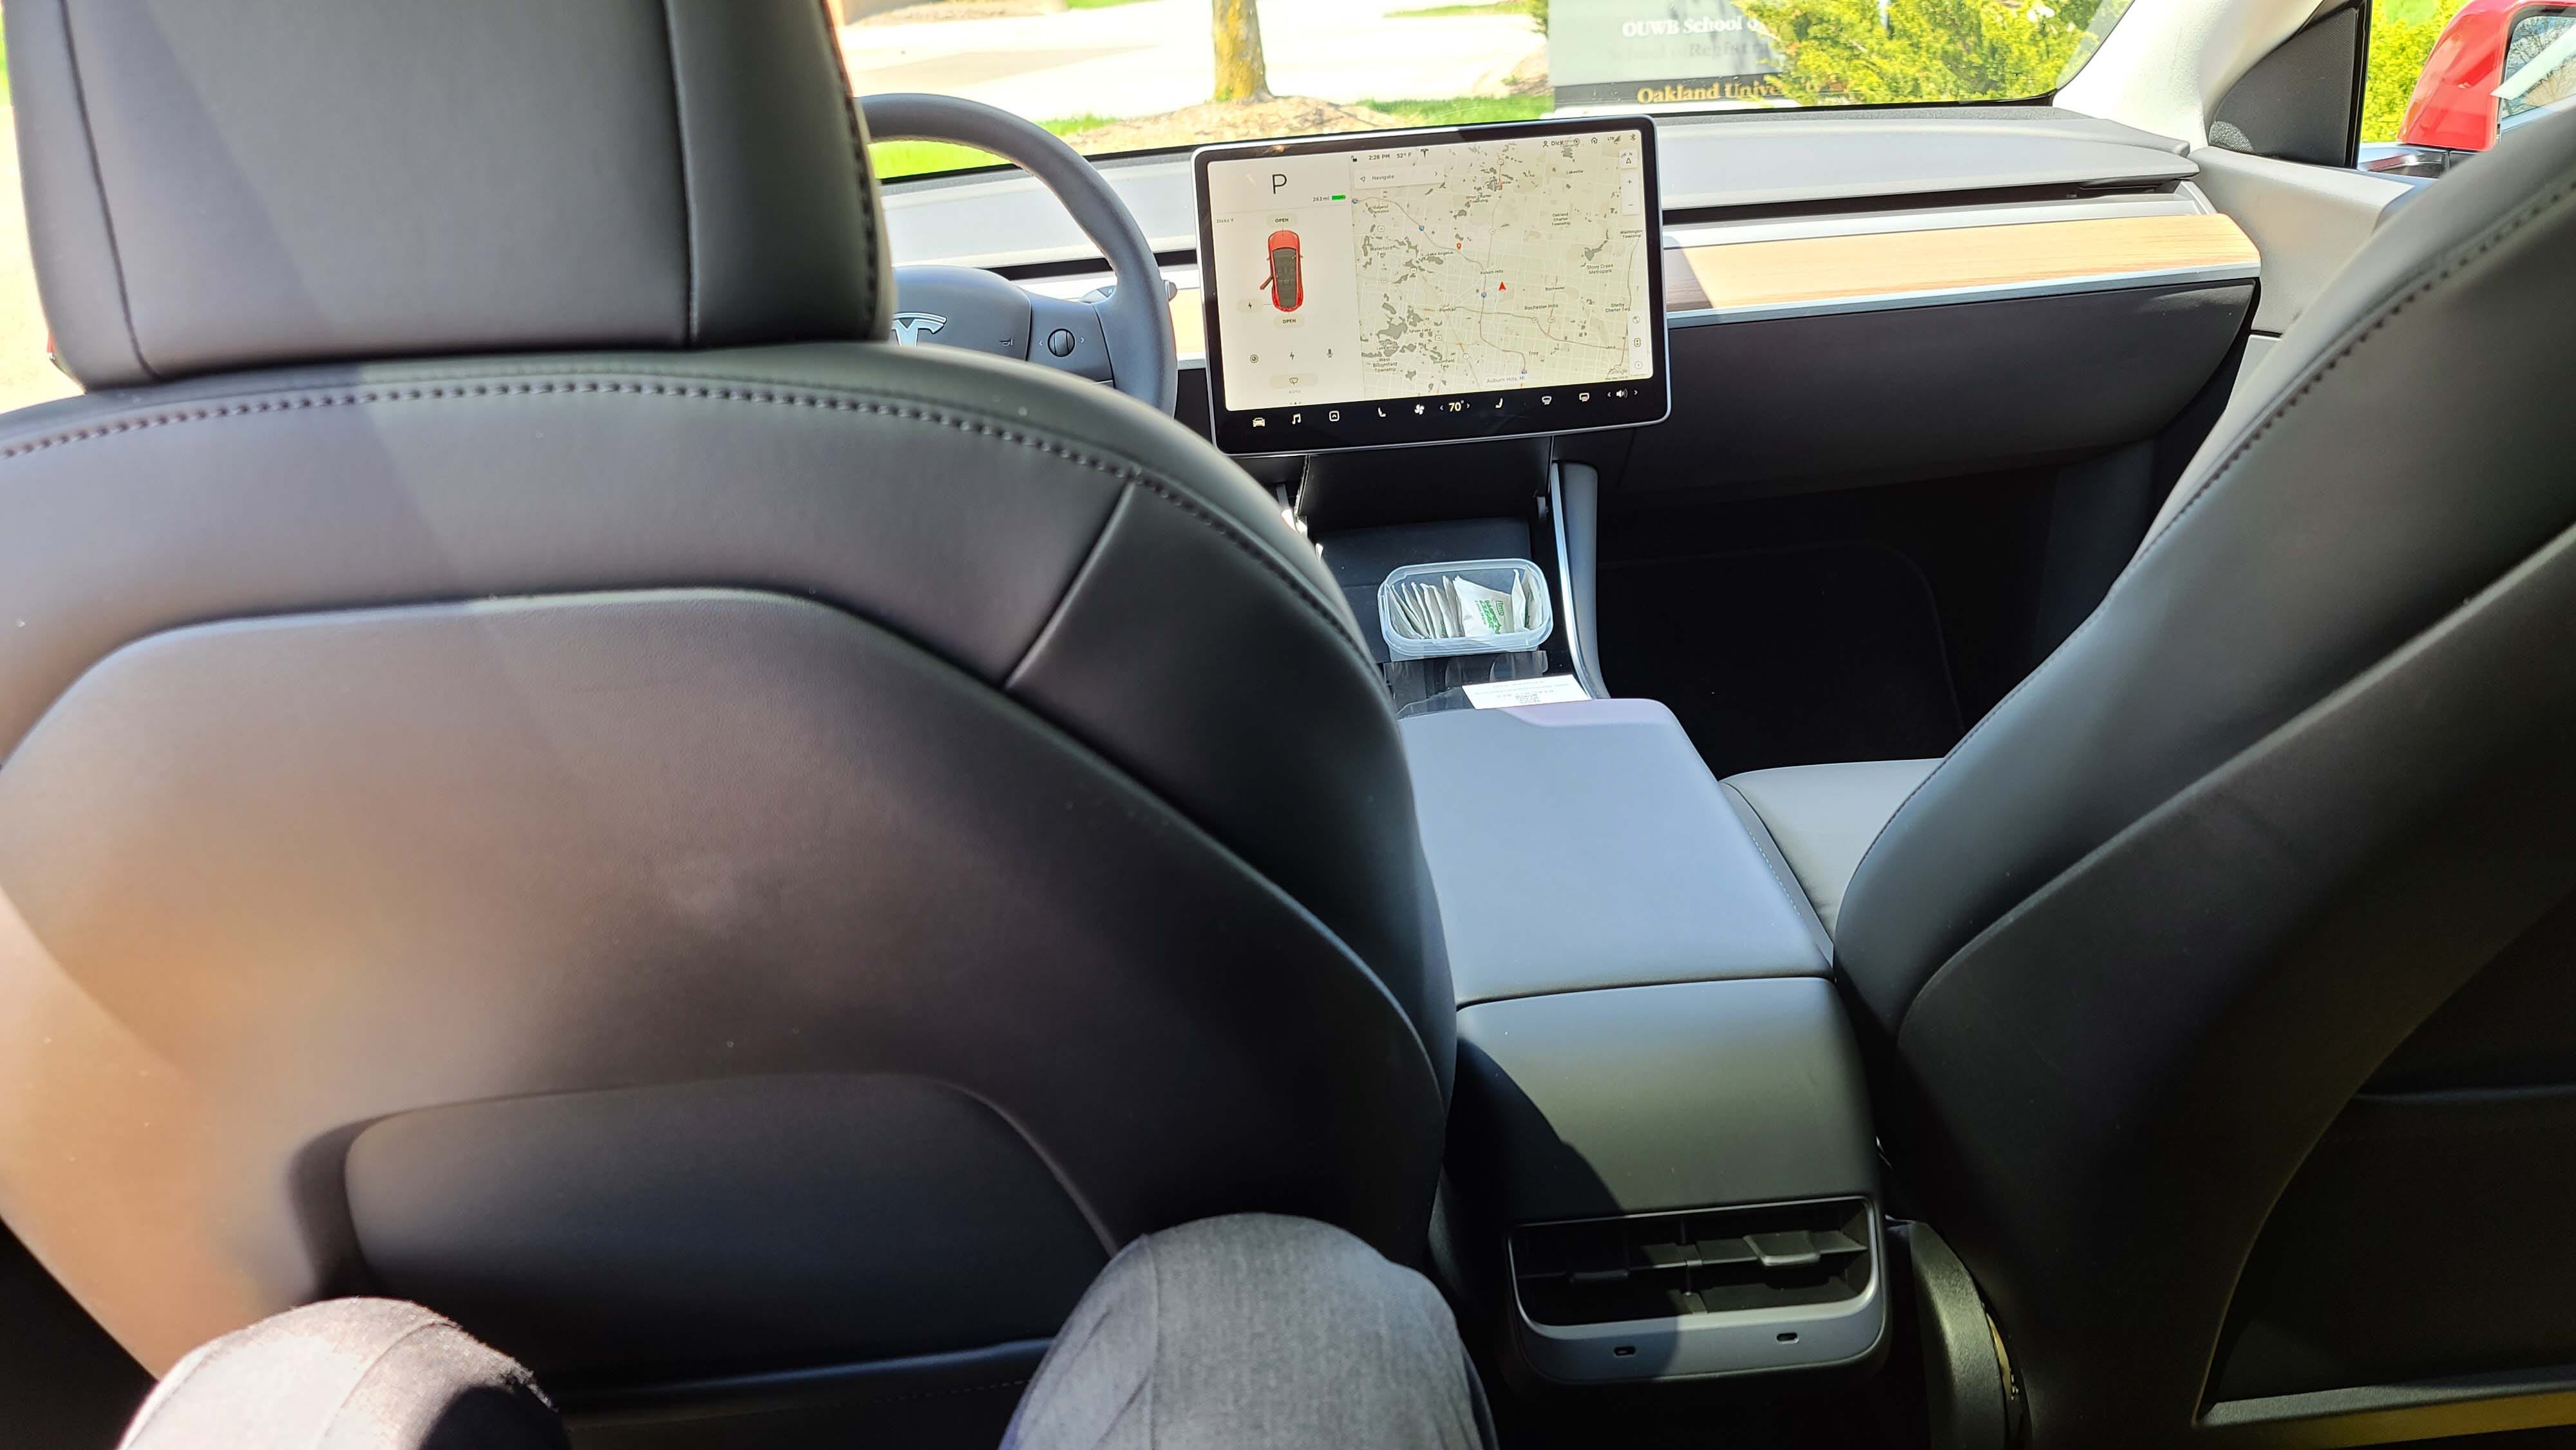 The Tesla Model Y gains 5 inches of rear seat room over the Model 3 sedan - making the y the roomiest in the compact SUV class.